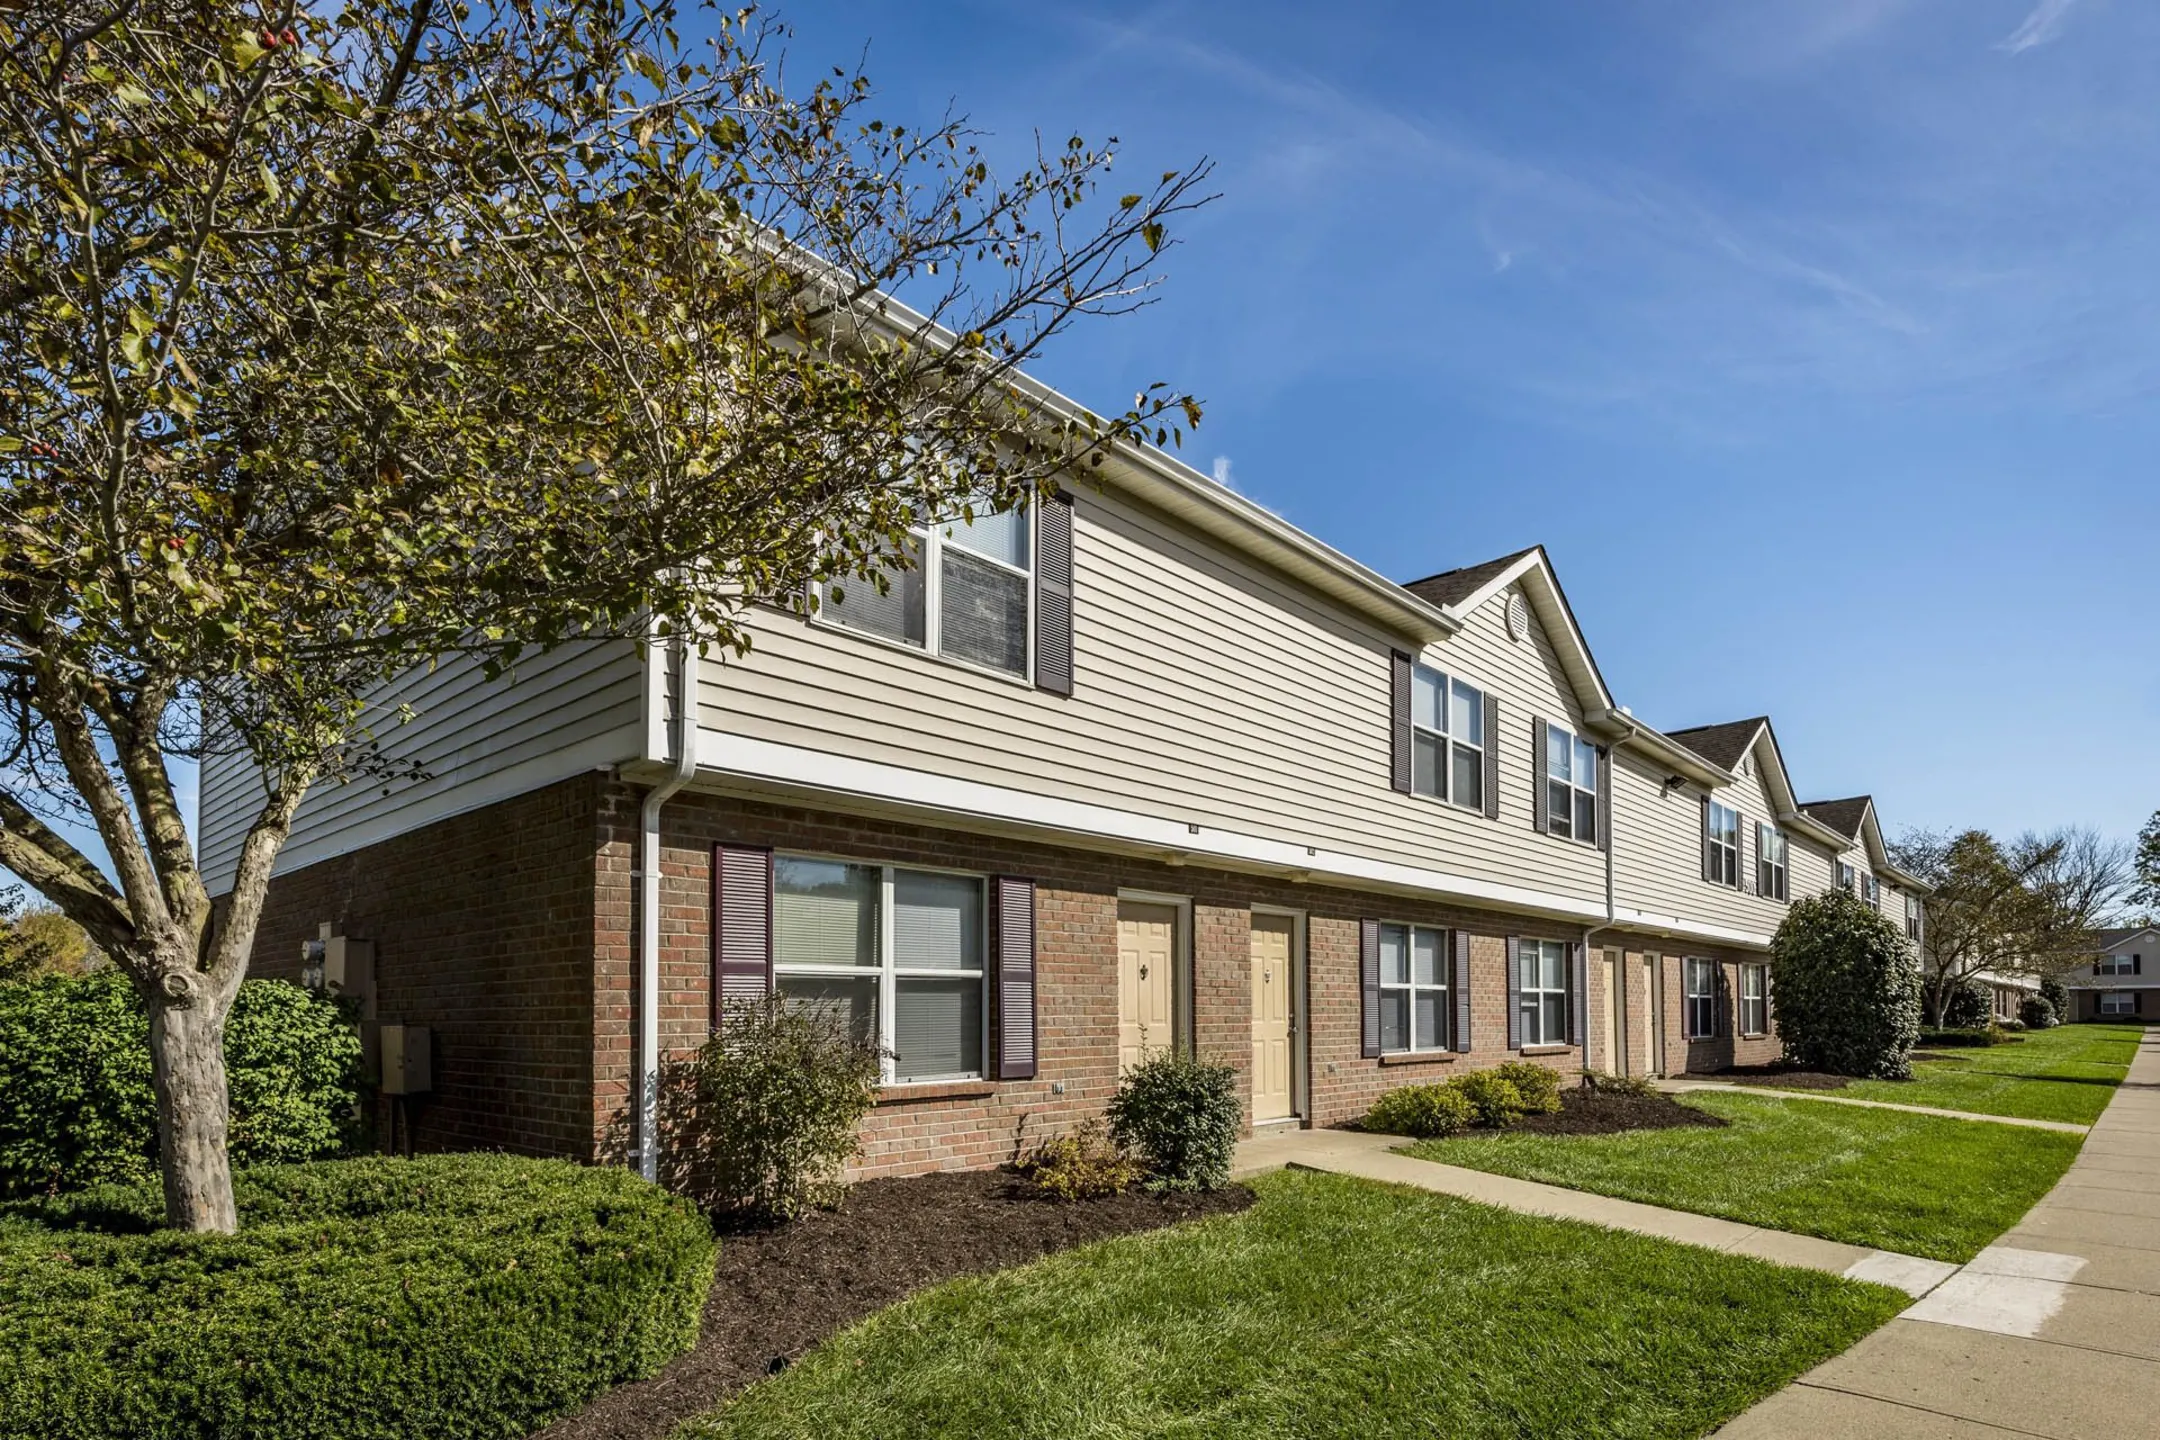 Building - MeadowView Townhomes - Goshen, OH